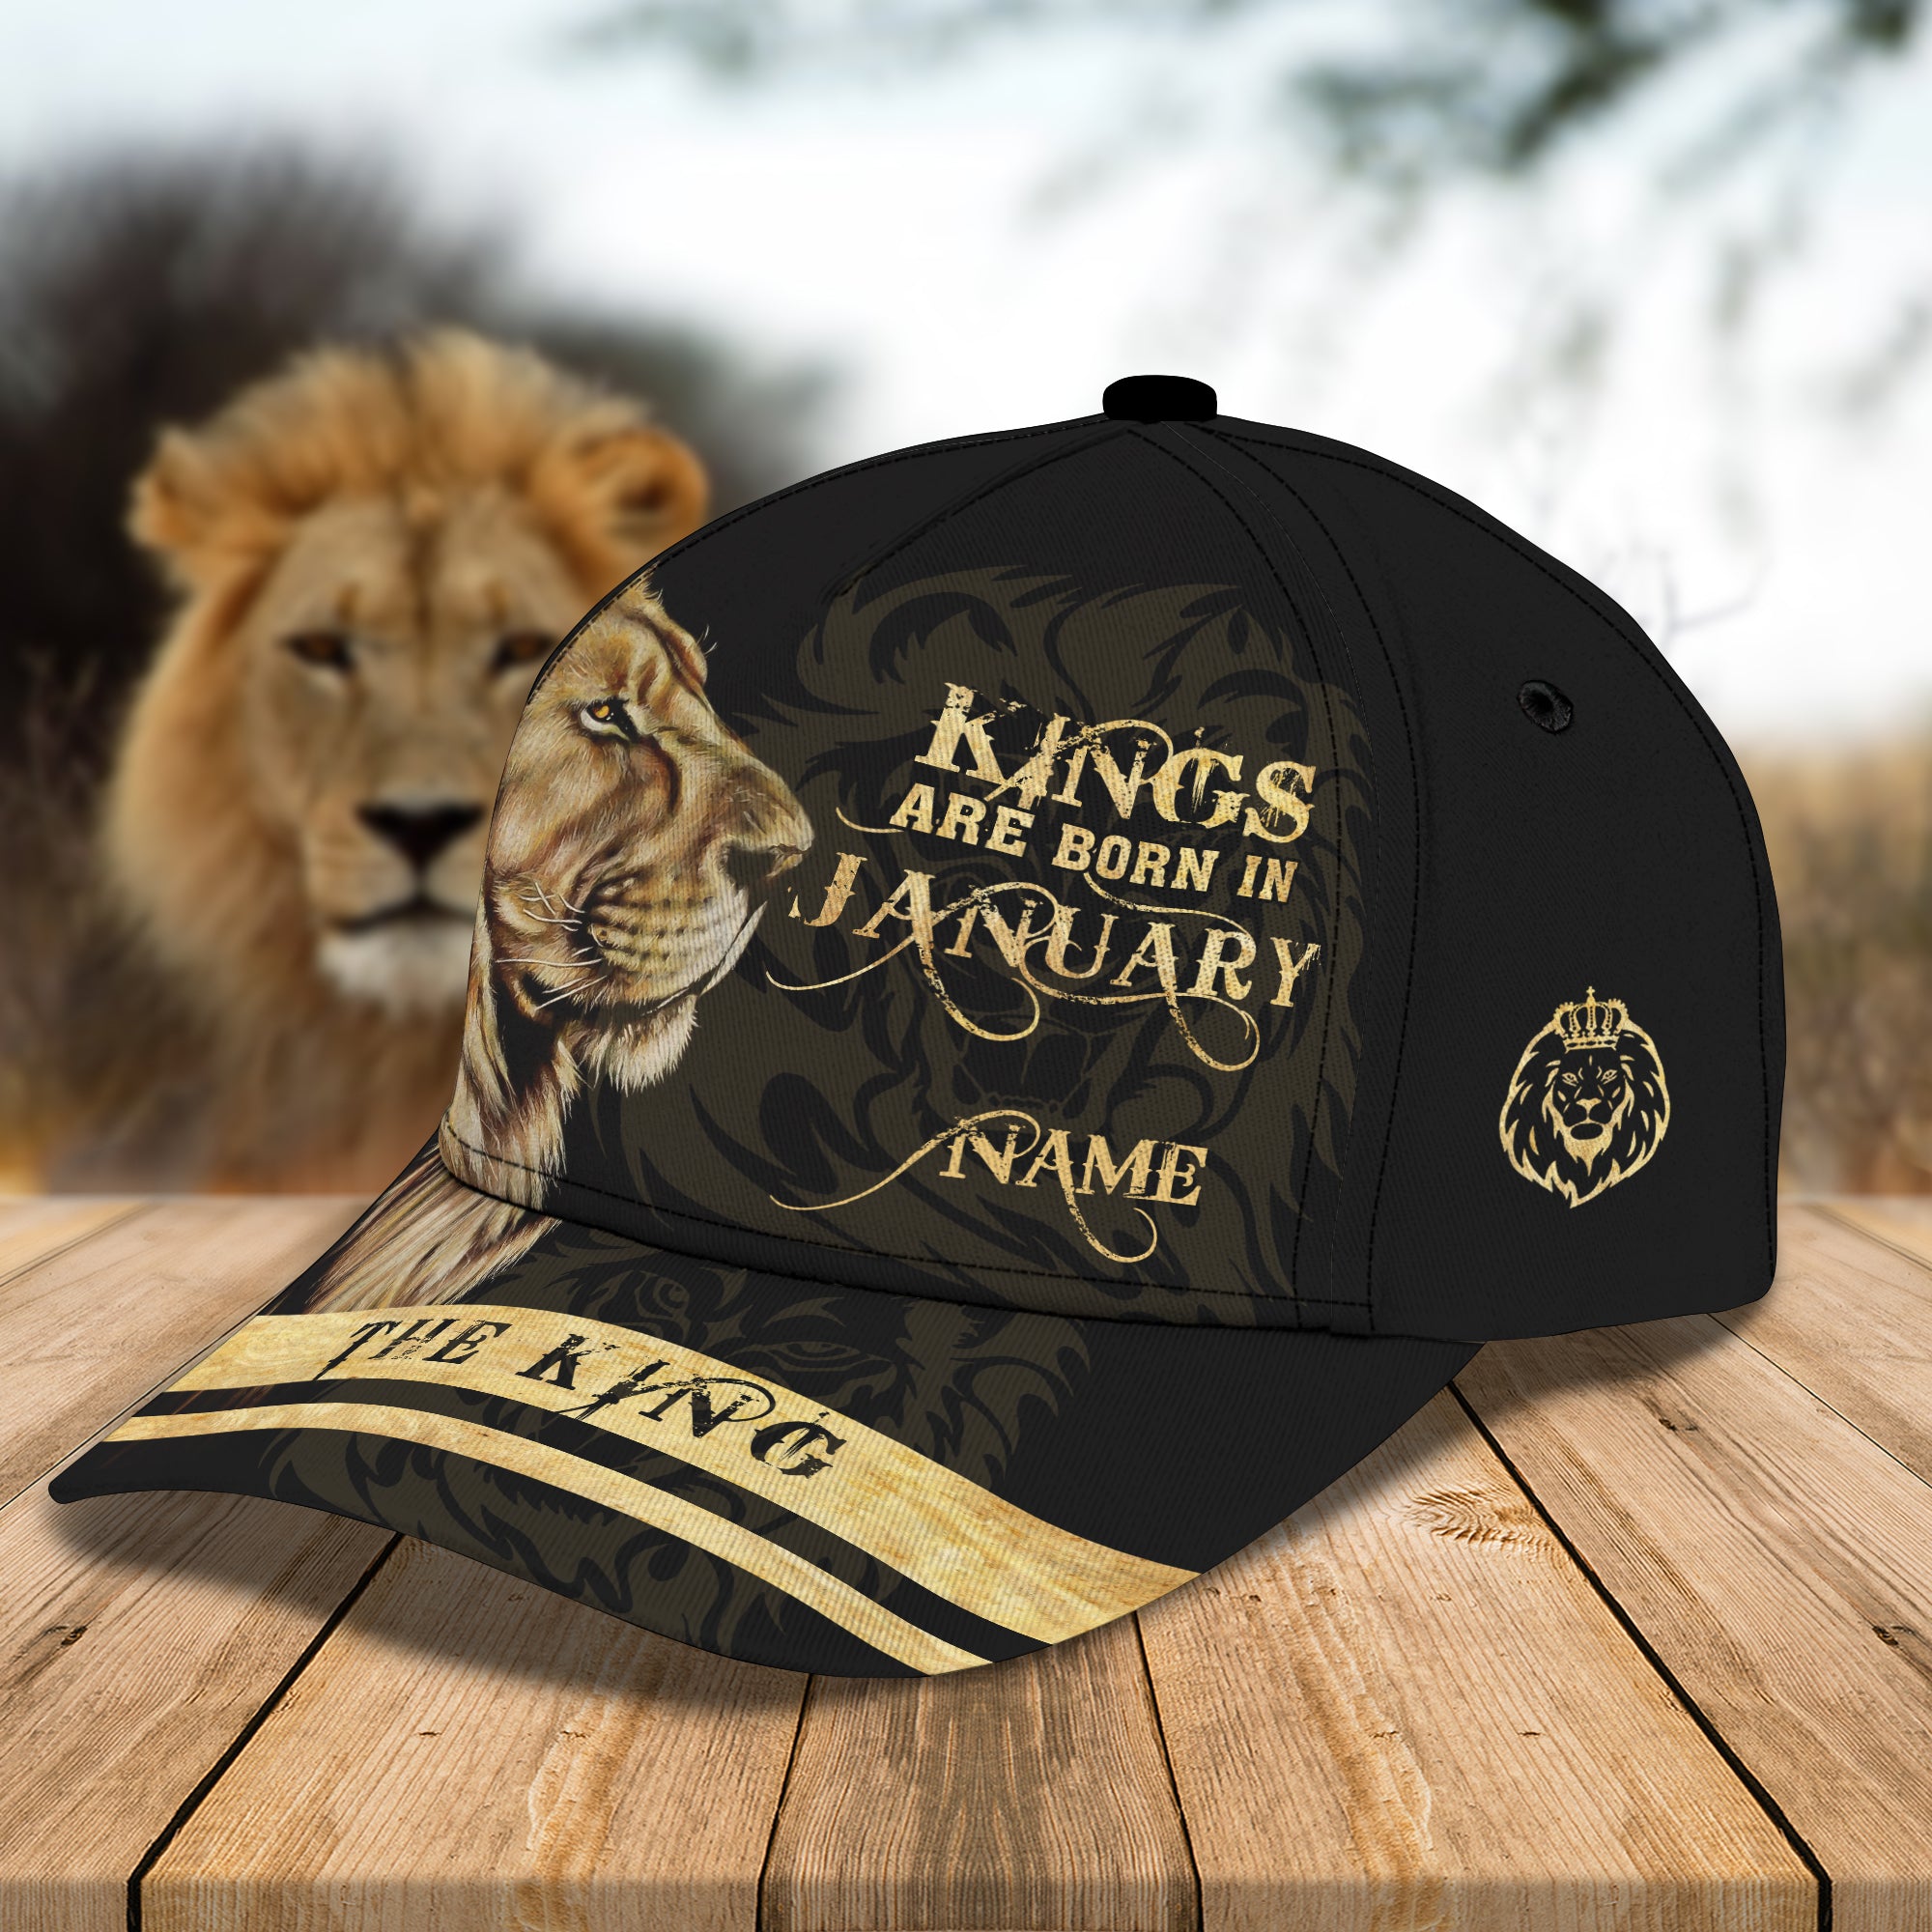 Kings Are Born In January- Personalized Name Cap 24 - Bhn97